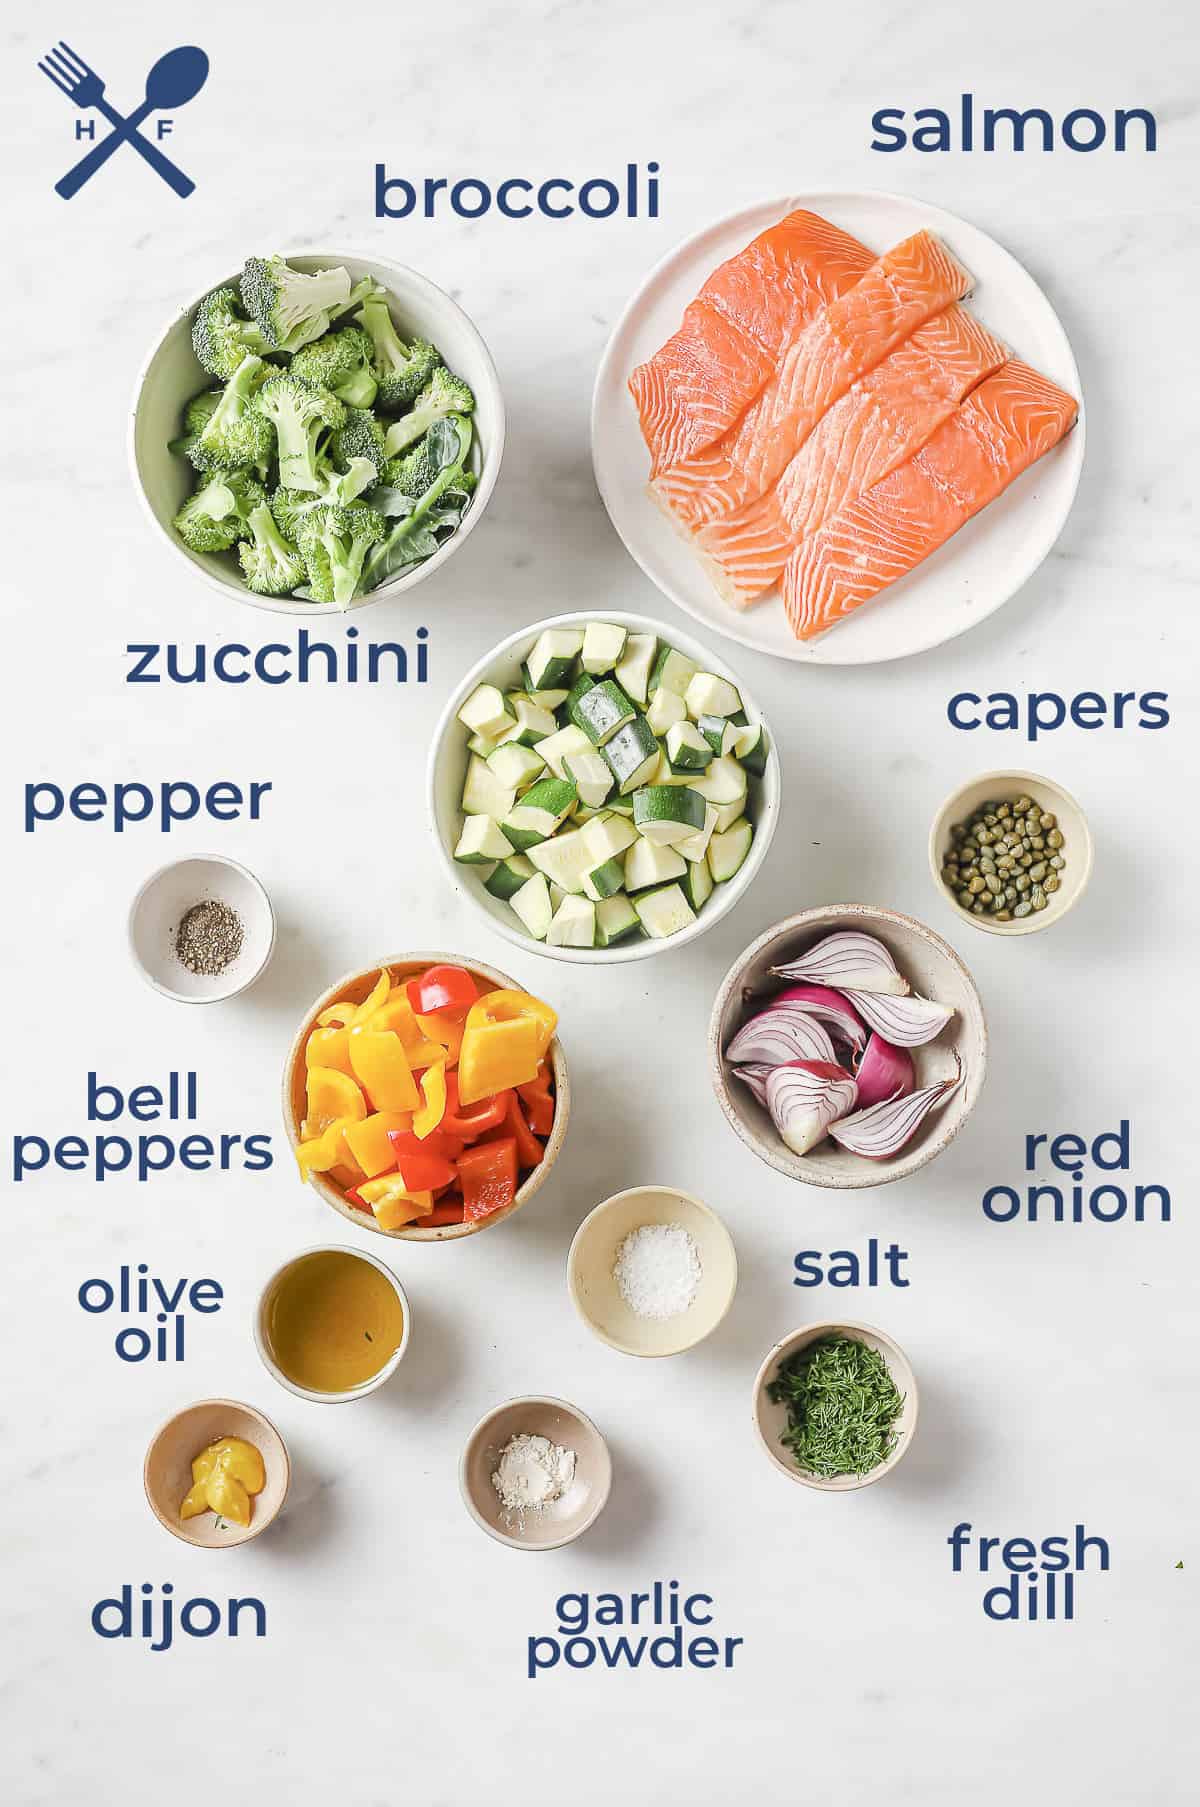 Ingredients laid out in separate bowls to make a sheet pan meal - salmon, broccoli, red onion, peppers, zucchini, dill, capers, and seasonings.